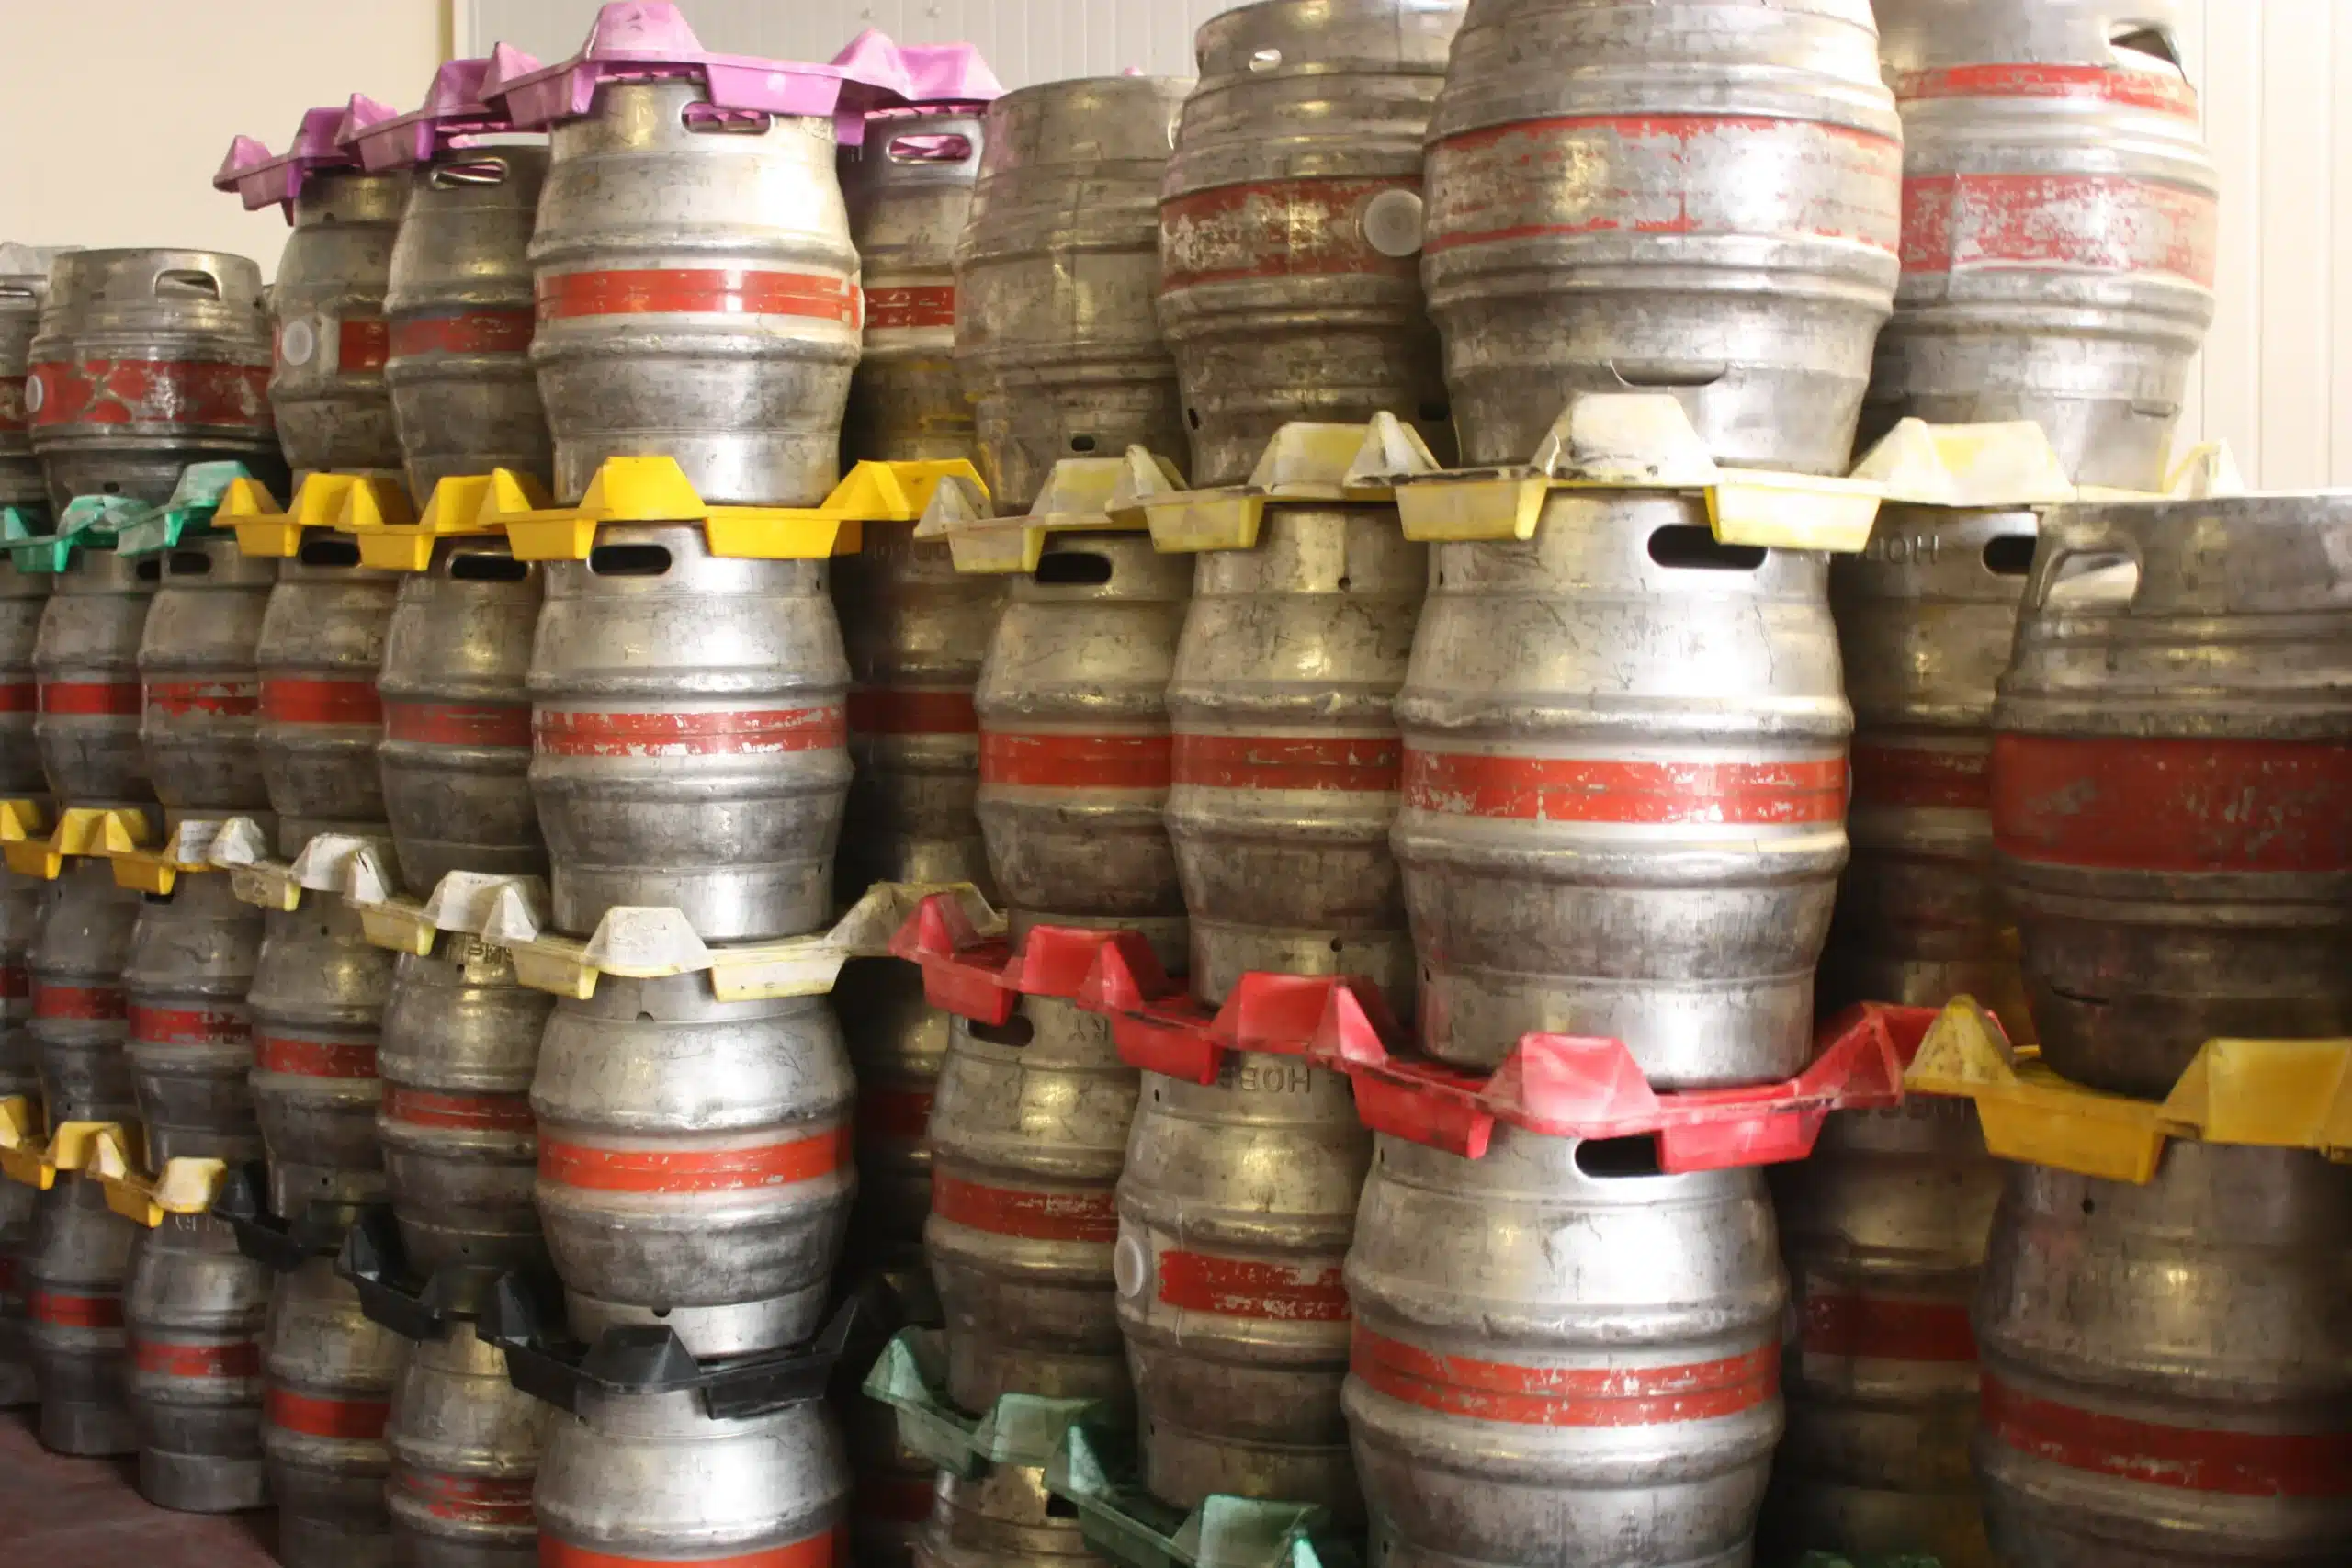 Stacked palettes of beer kegs